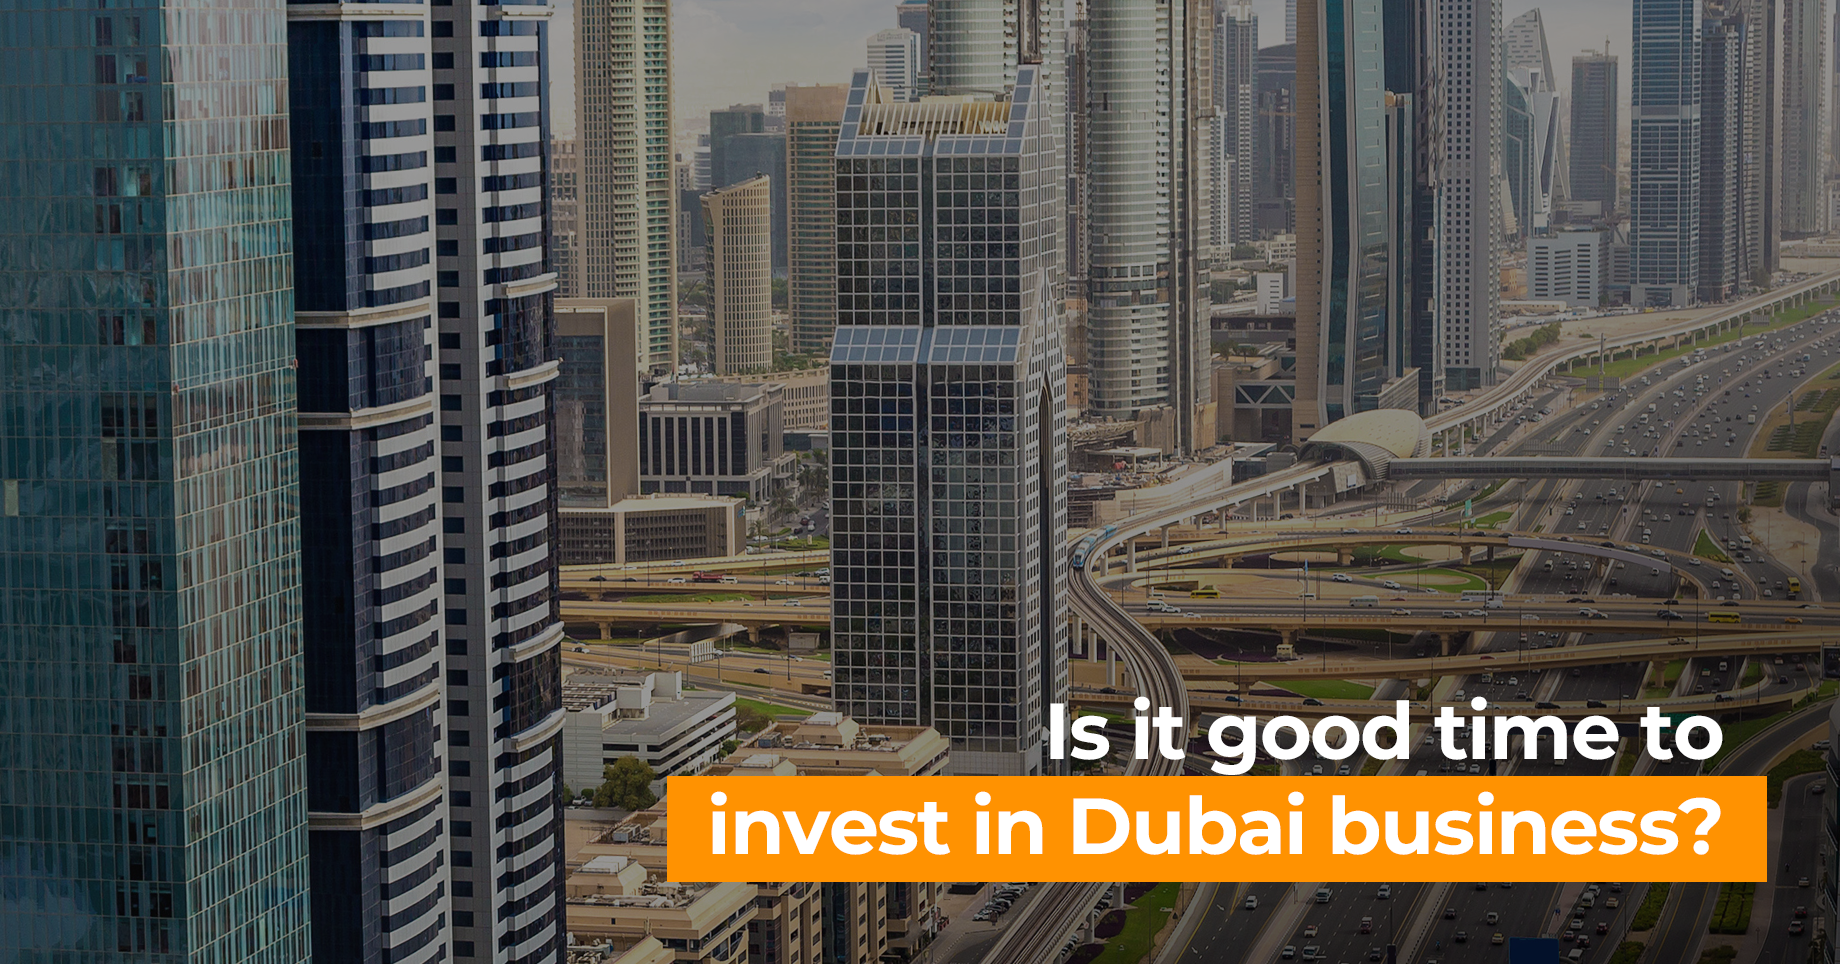 Is it good time to invest in Dubai business?